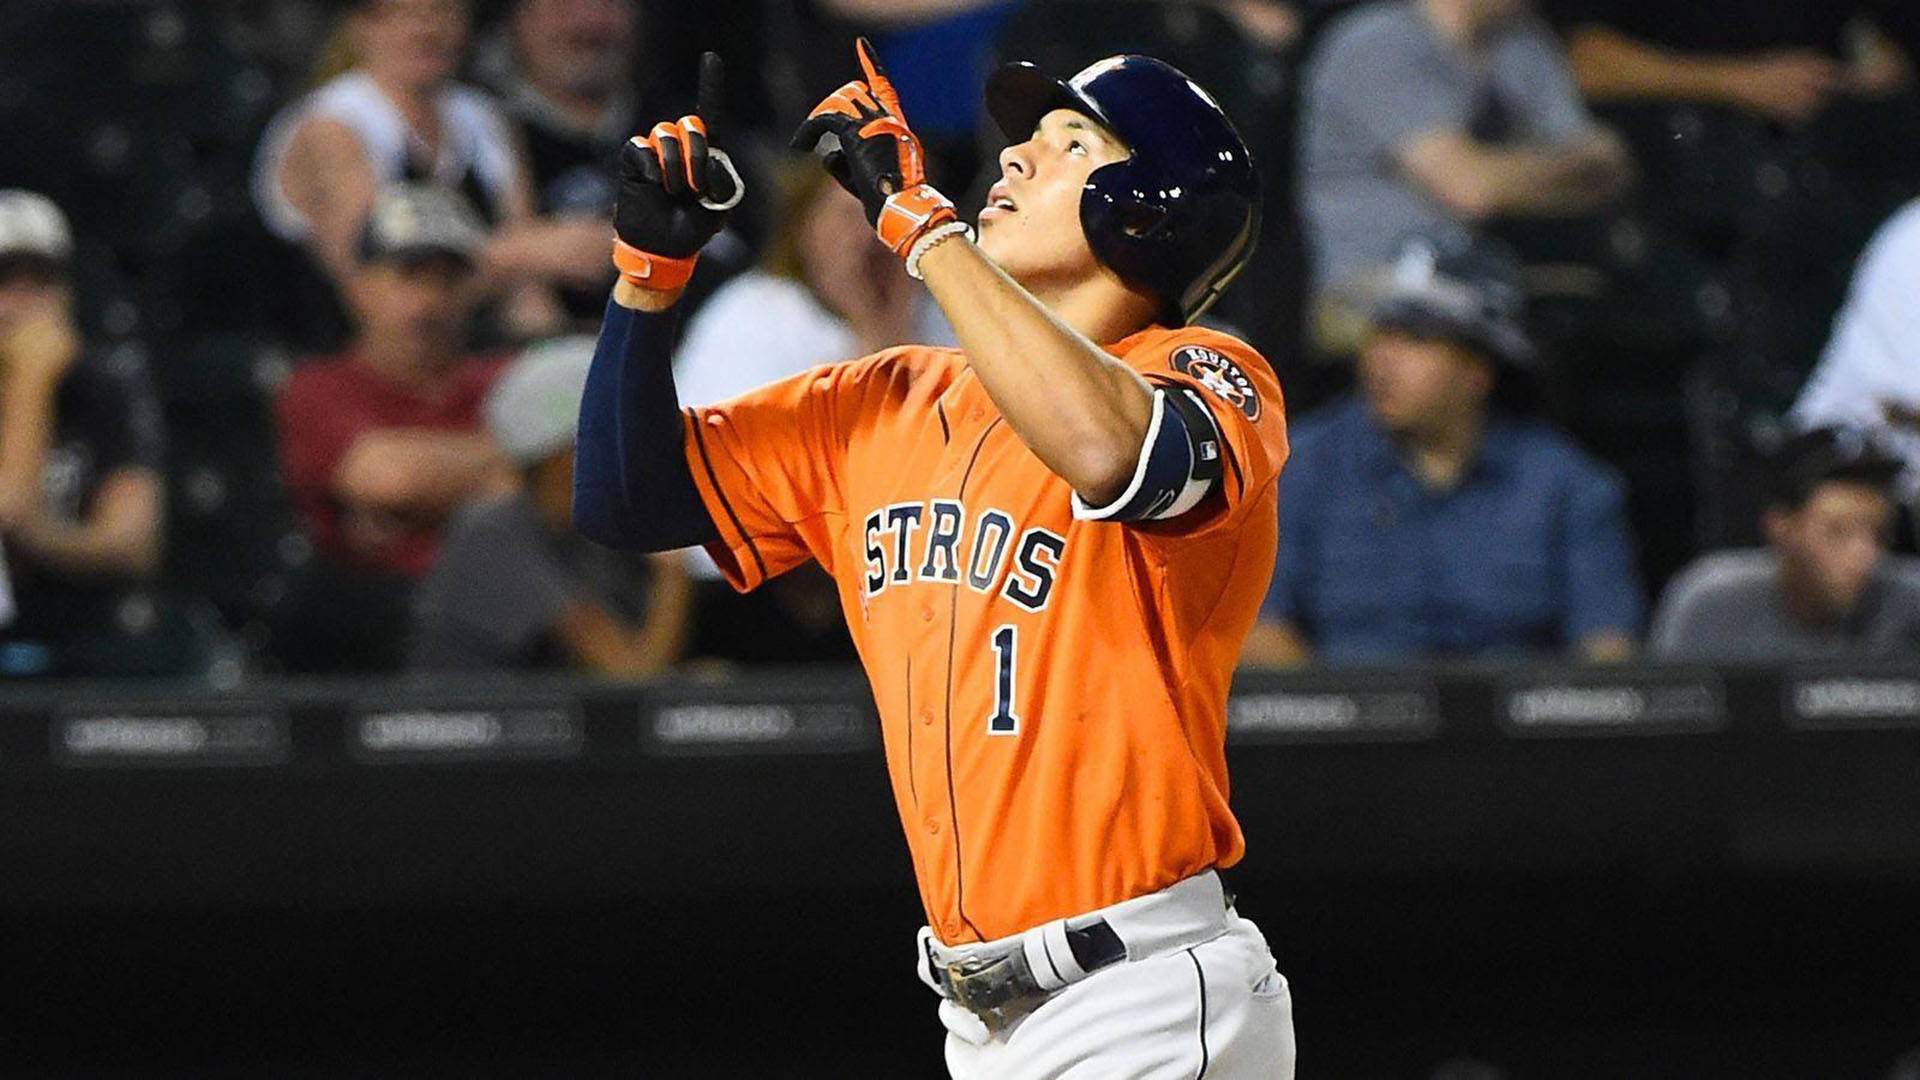 Tackcarlos Correa. (this Sentence Doesn't Really Make Sense In Context Of Computer Or Mobile Wallpaper, But If You Provide Me With More Information On What You Want To Say, I Can Help With A More Appropriate Translation!) Wallpaper